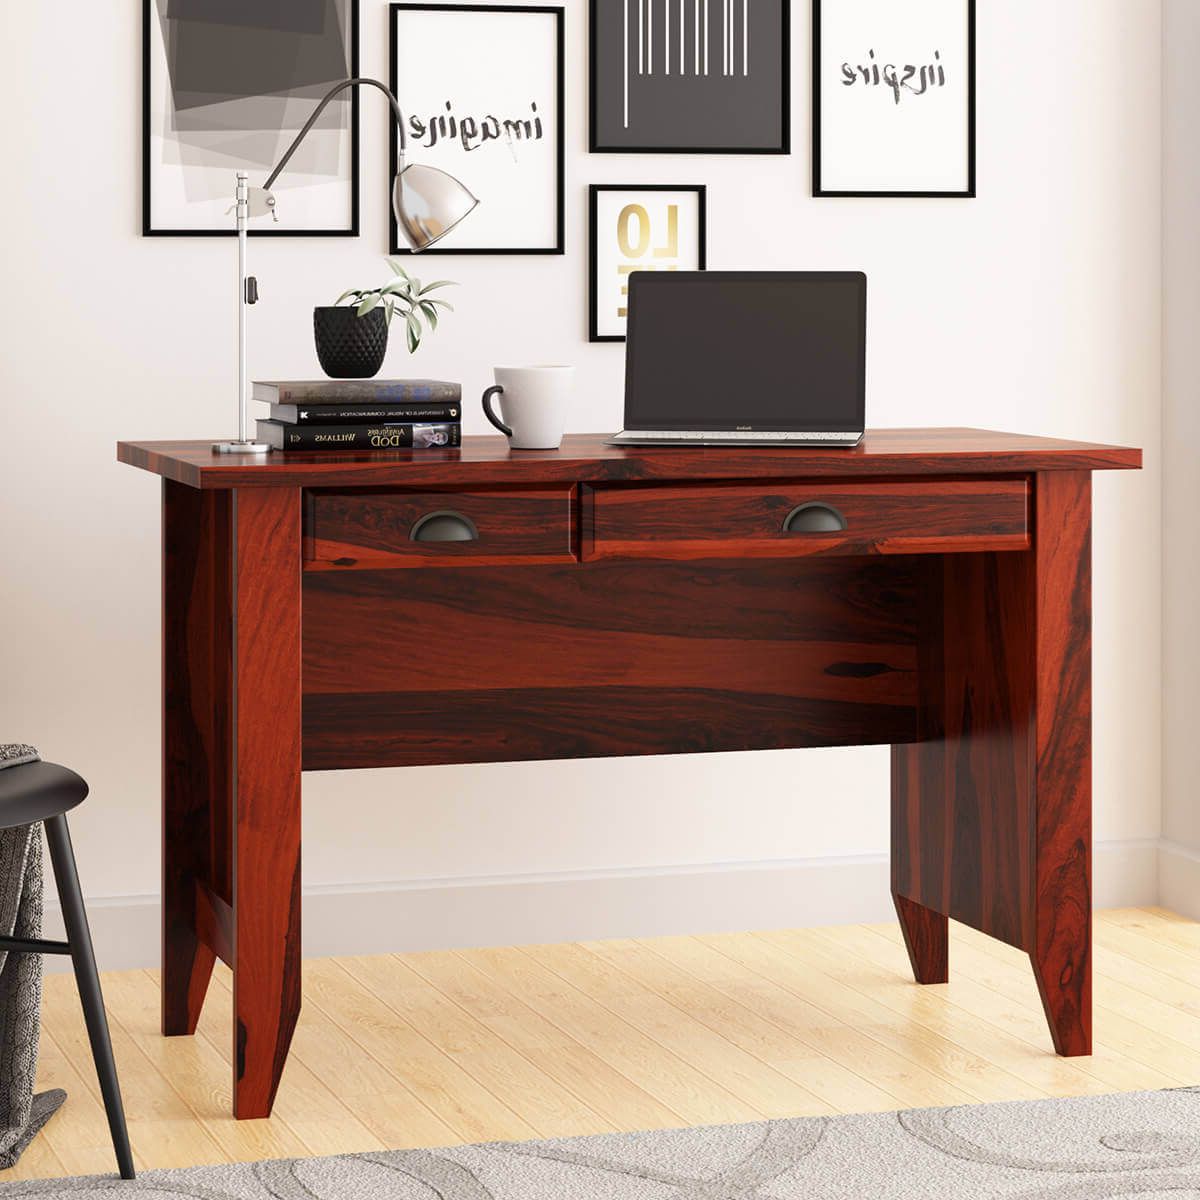 Brenda Rustic Solid Wood 2 Drawer Writing Desk Inside Most Current Rustic Acacia Wooden Writing Desks (View 4 of 15)